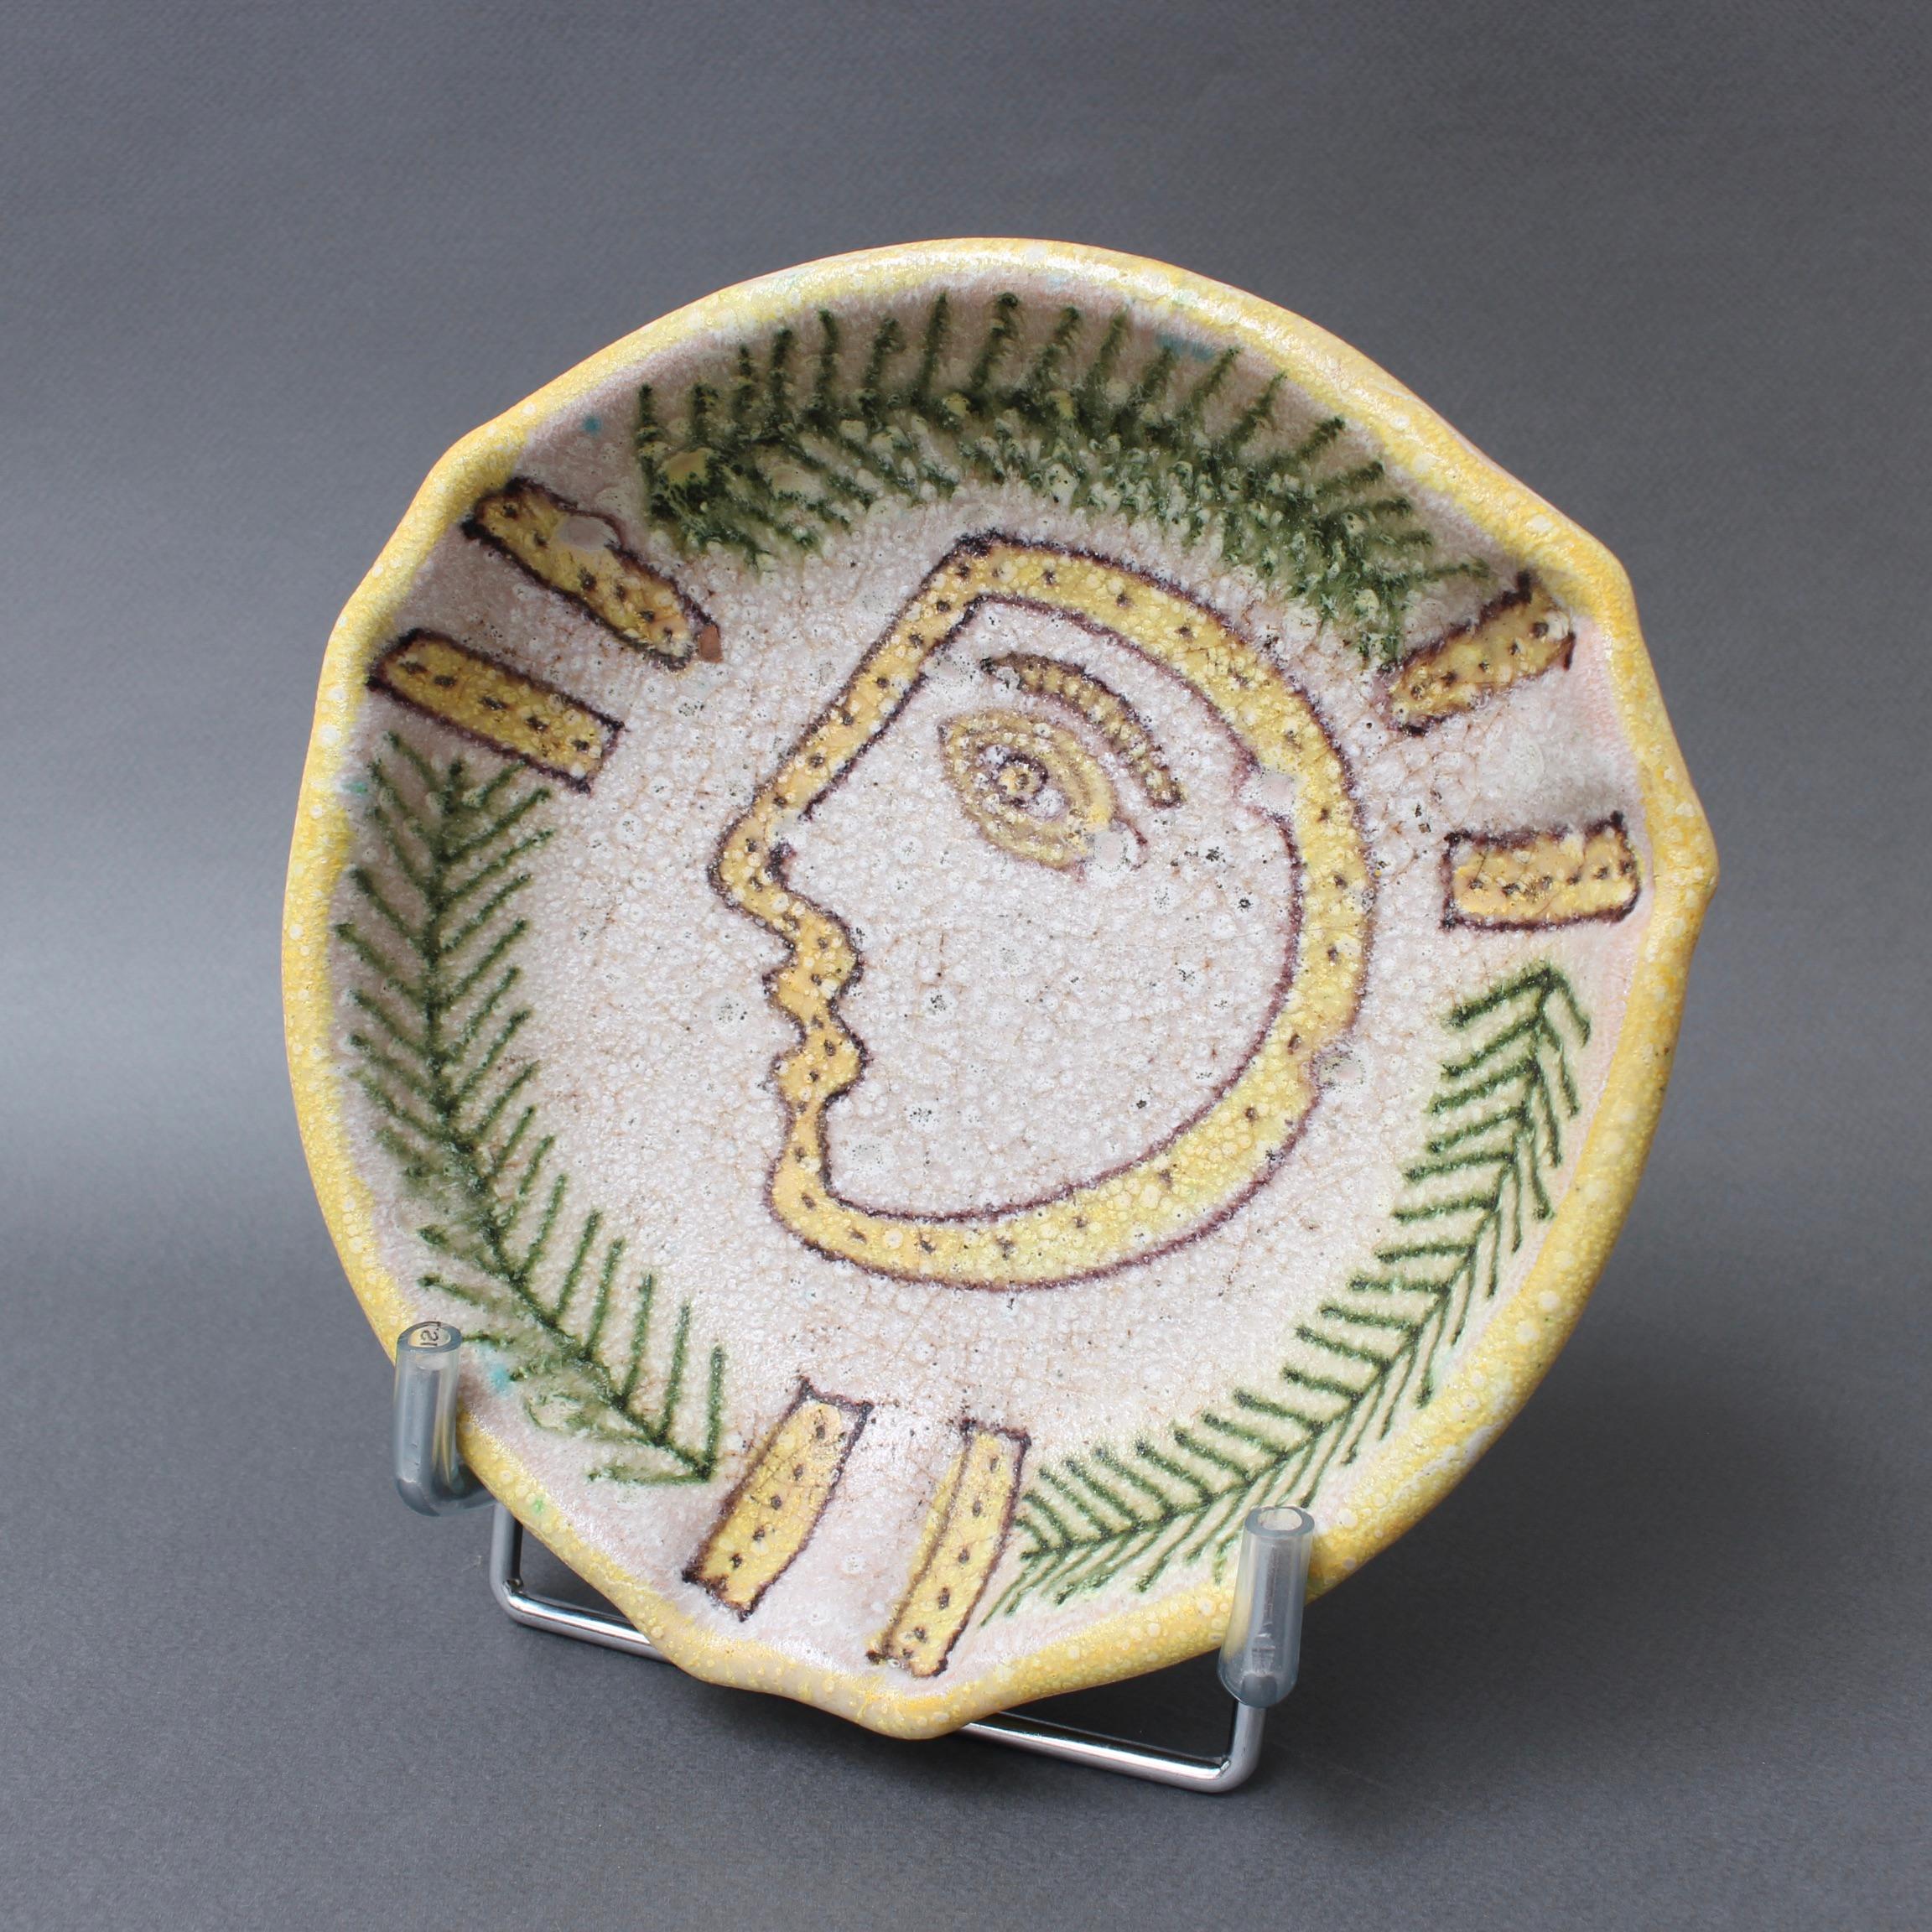 Decorative Italian ceramic bowl by Guido Gambone (circa 1950s). Decorated on the inside with stylized profile and laurel wreath motif reminiscent of a decorated Roman Legion soldier. The only thing missing is 'SPQR', the symbolic abbreviated phrase